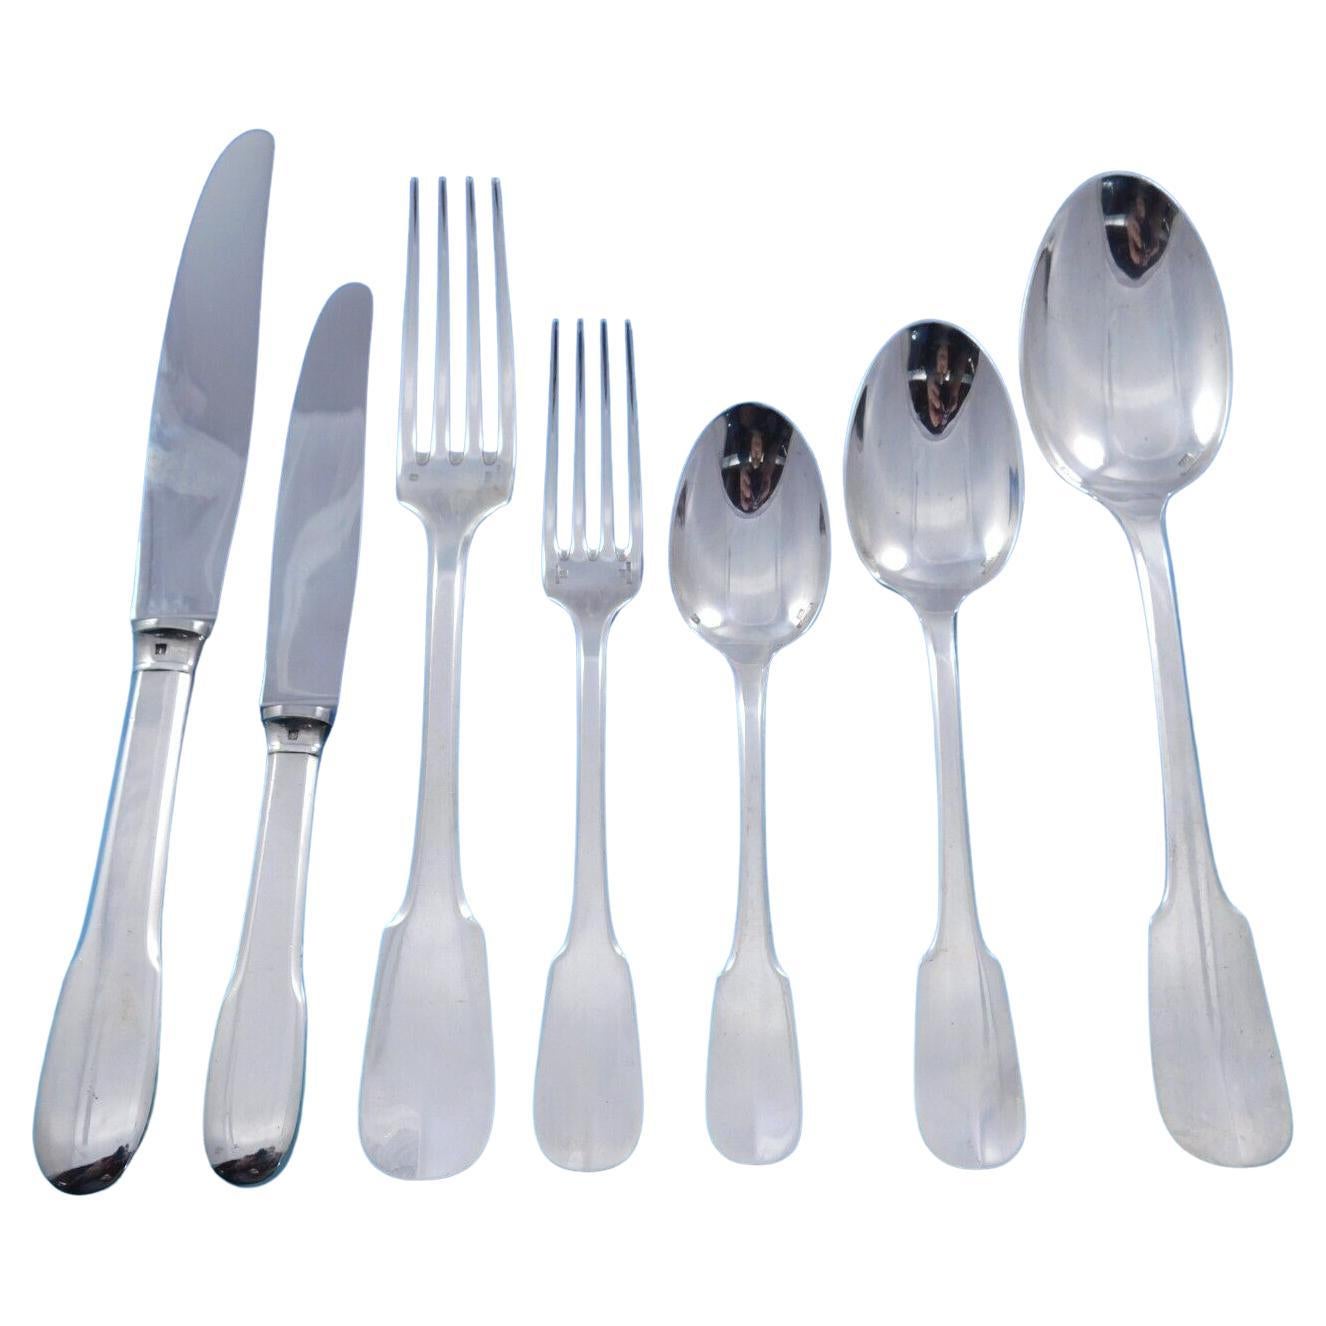 Cluny by Christofle France Silverplate Flatware Service Set 95 pieces Dinner